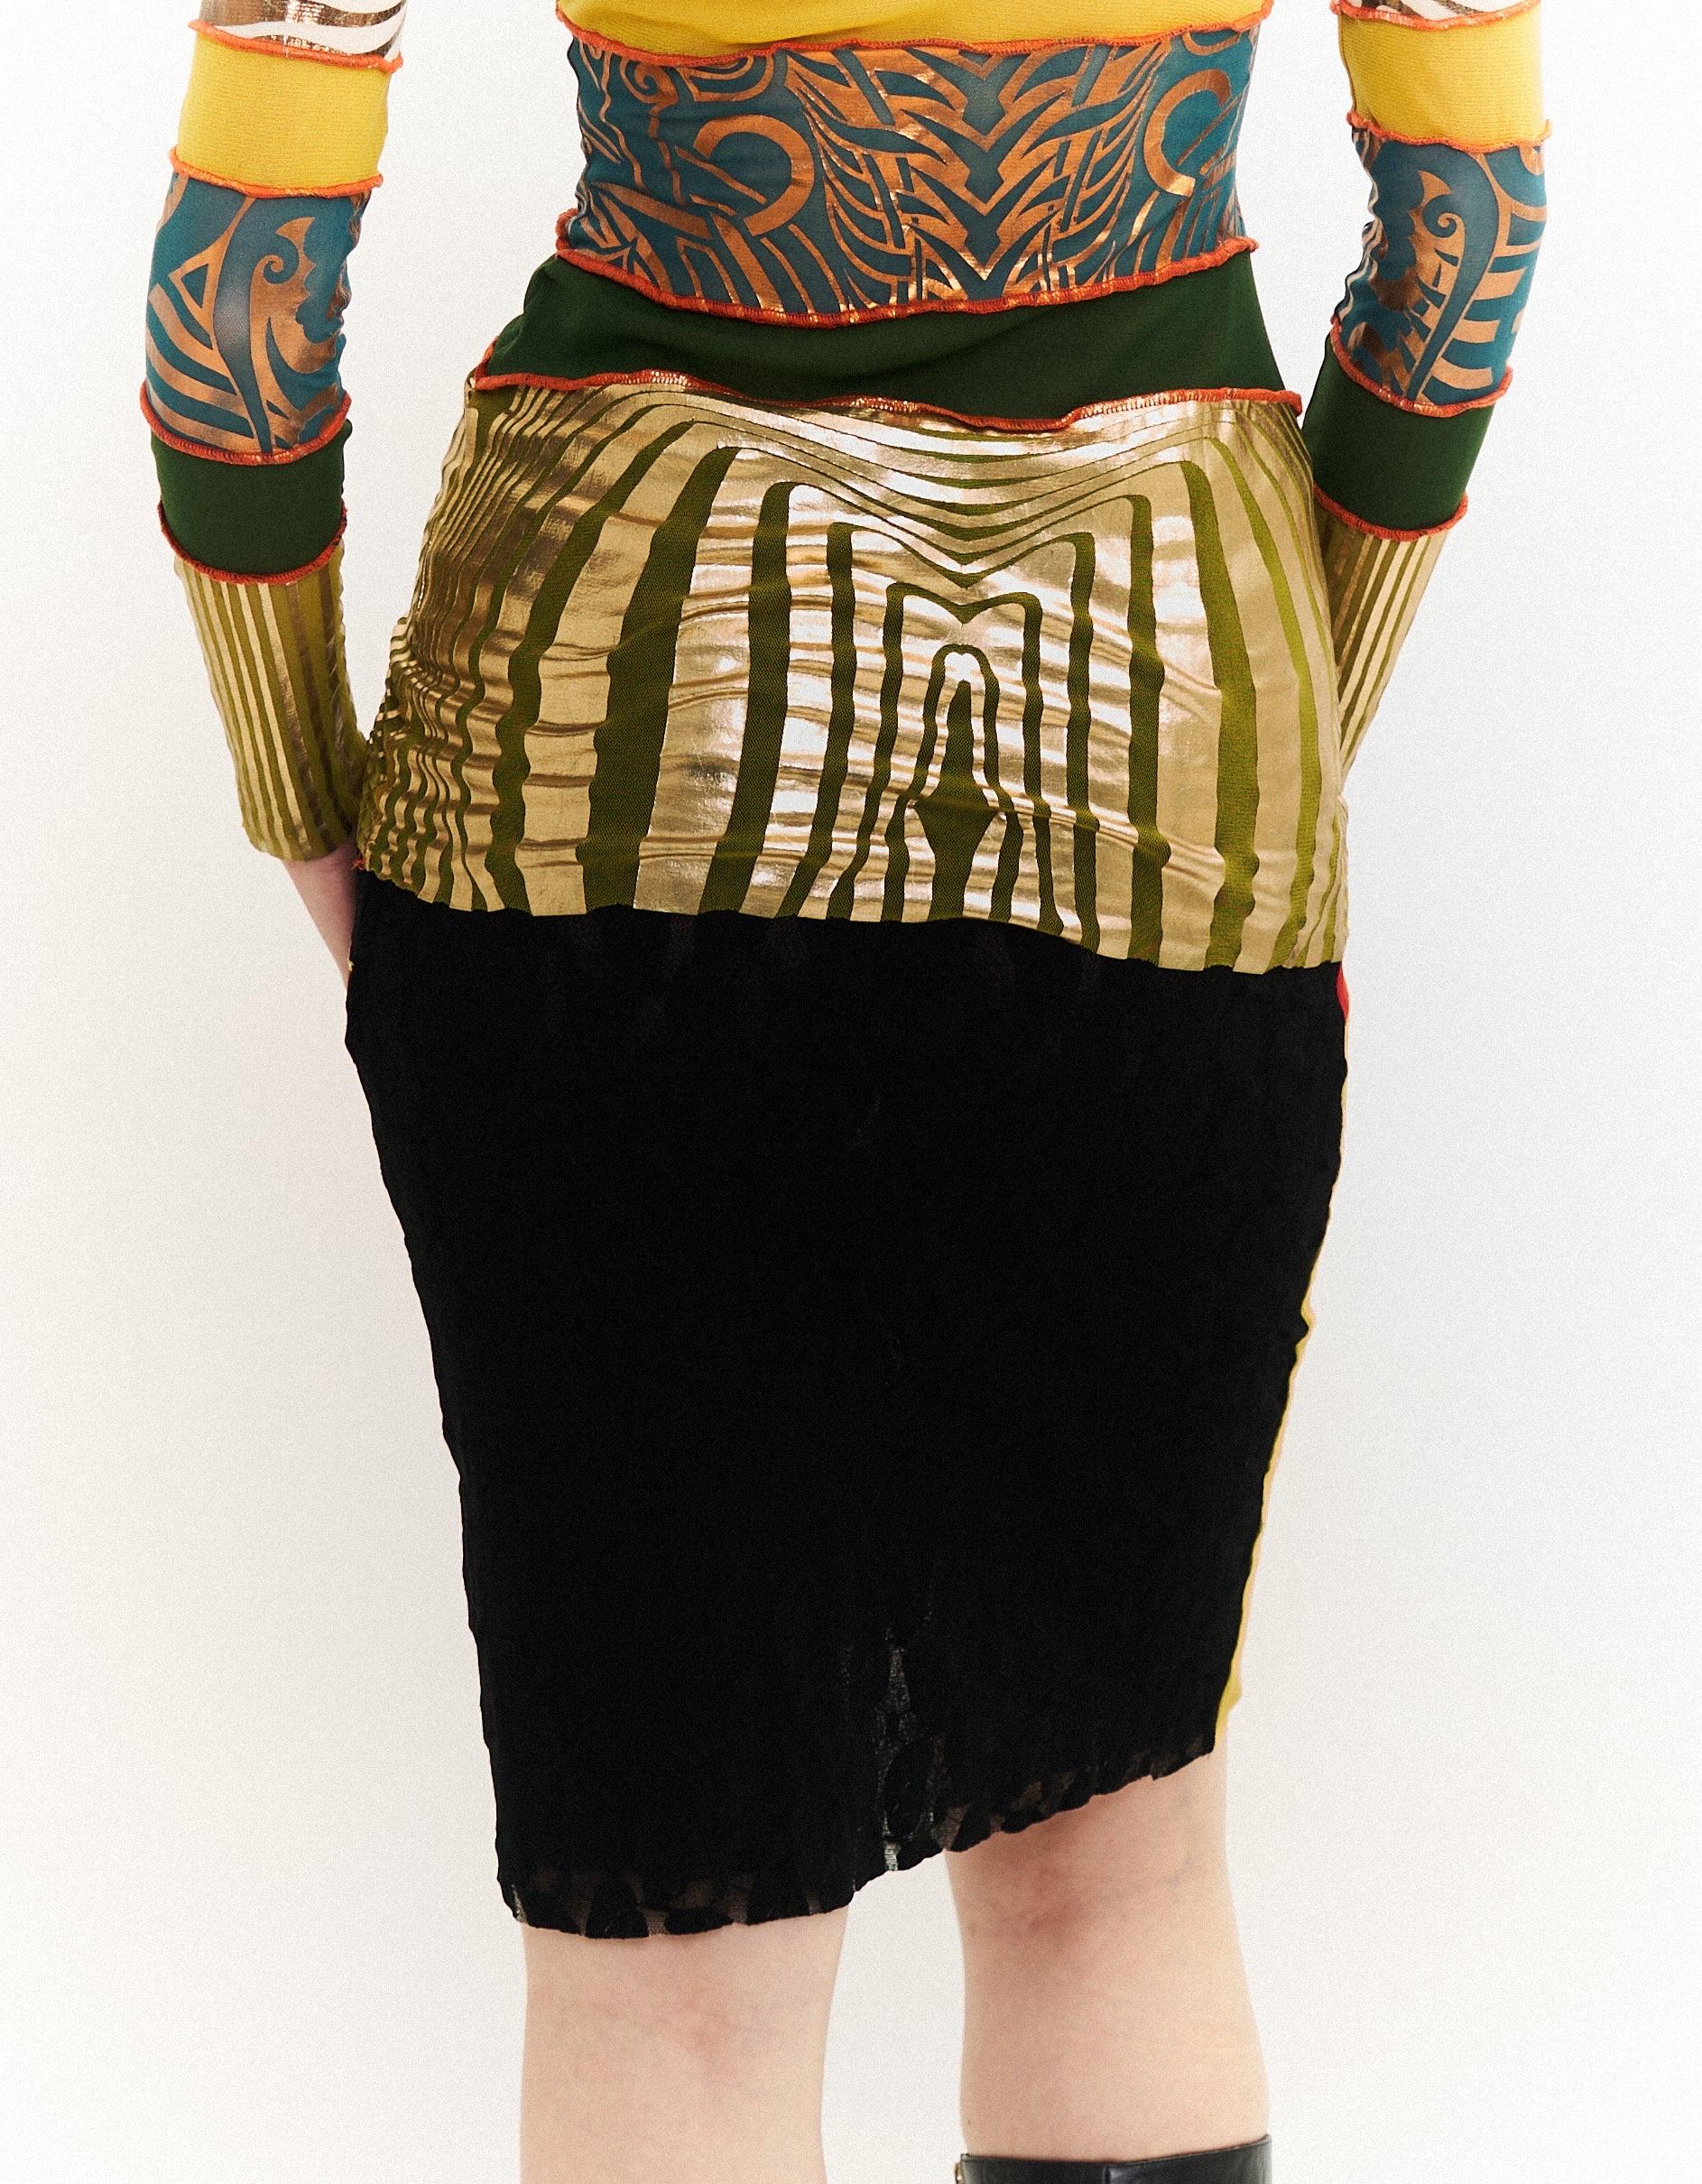 Jean Paul Gaultier S/S 1996 Cyberbaba Mesh Foil Print Top & Skirt Ensemble In Good Condition For Sale In BELLEVUE HILL, NSW